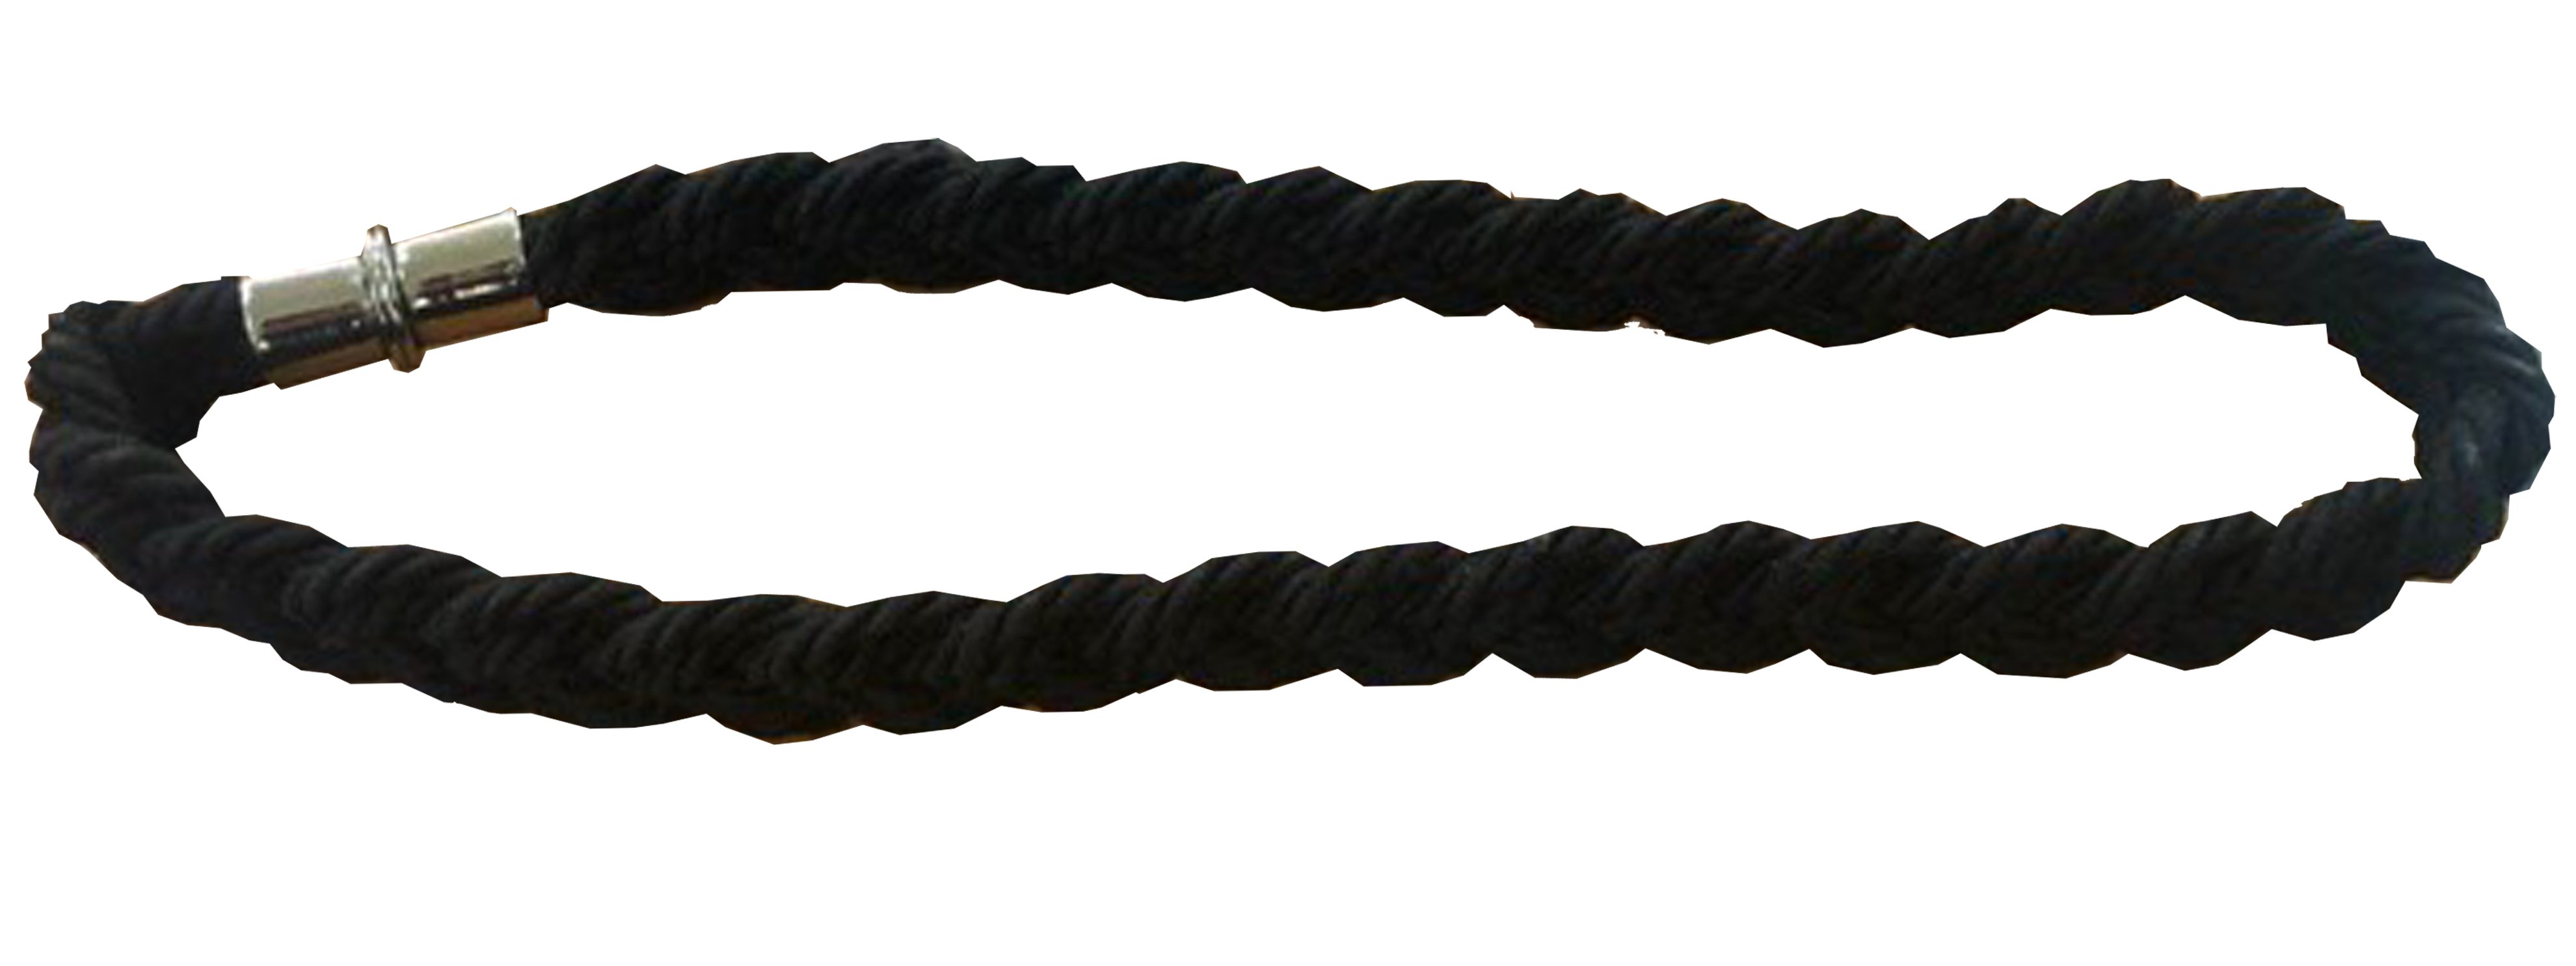 PAIR 2 pieces Natural Cotton Curtain Tie Backswith Rope Plaited Weave - Black 80cm